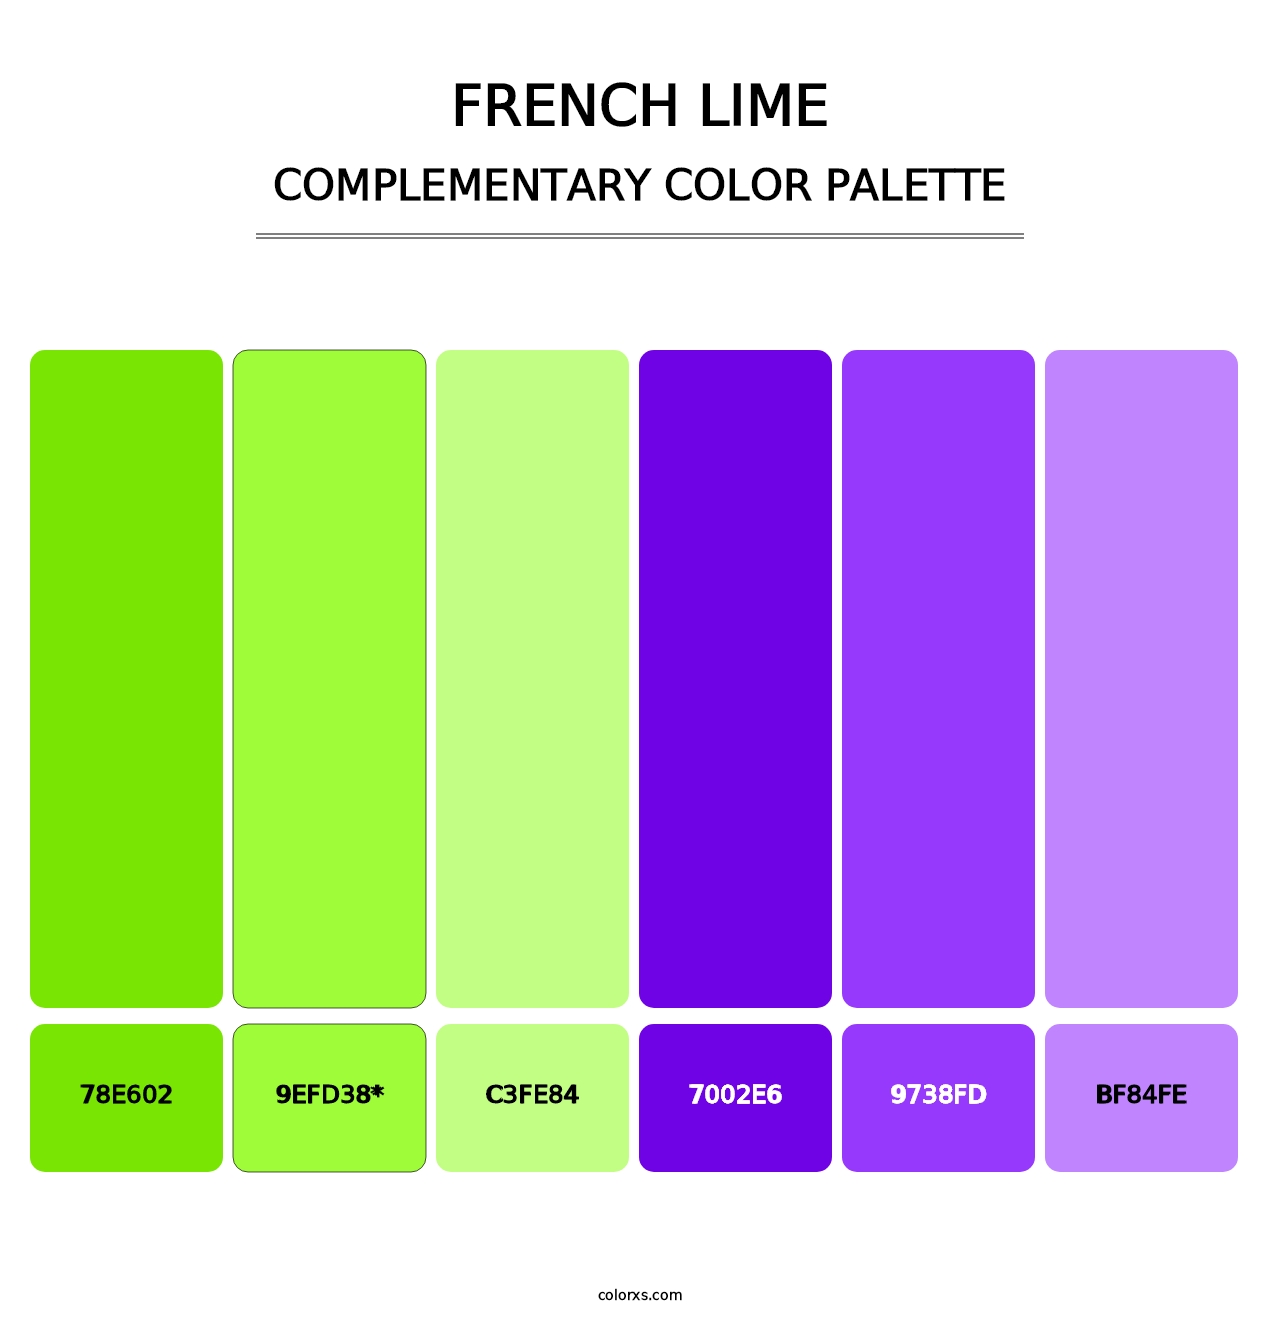 French Lime - Complementary Color Palette